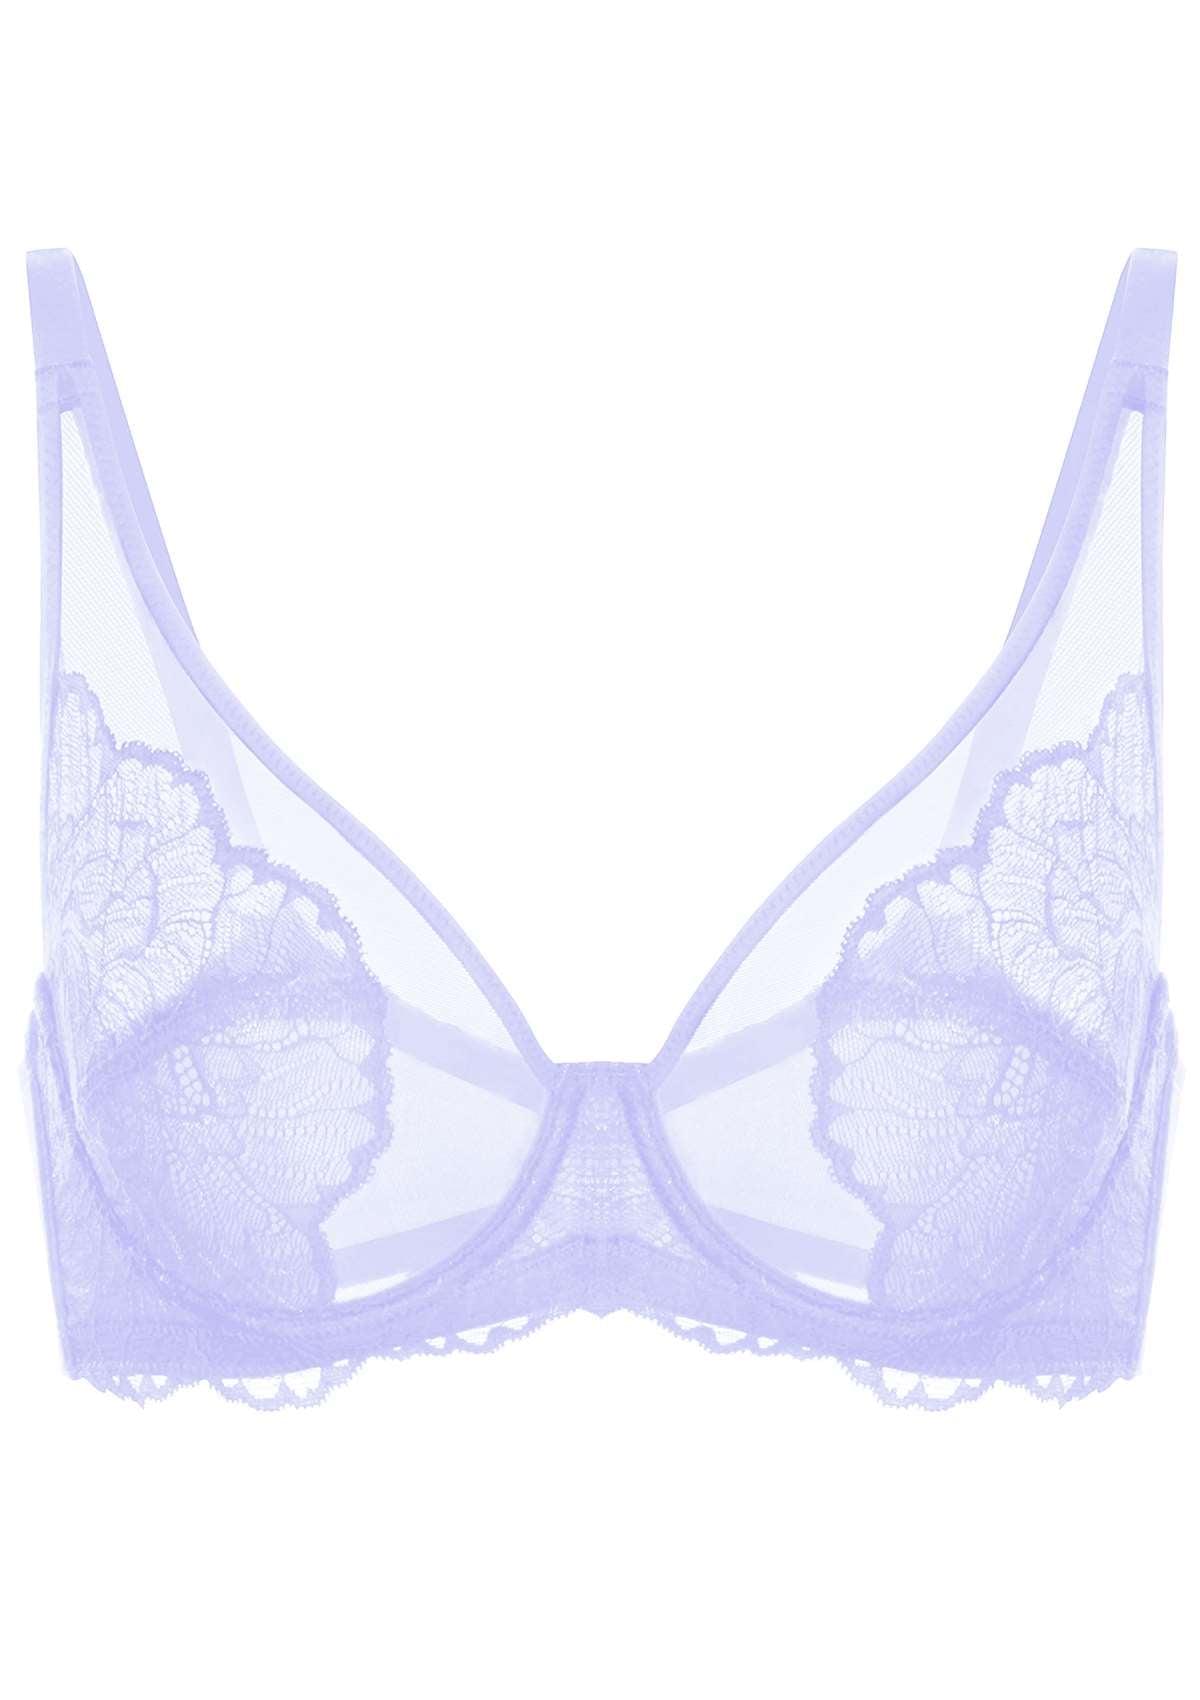 HSIA Blossom Transparent Lace Bra: Plus Size Wired Back Smoothing Bra - Light Purple / 36 / D